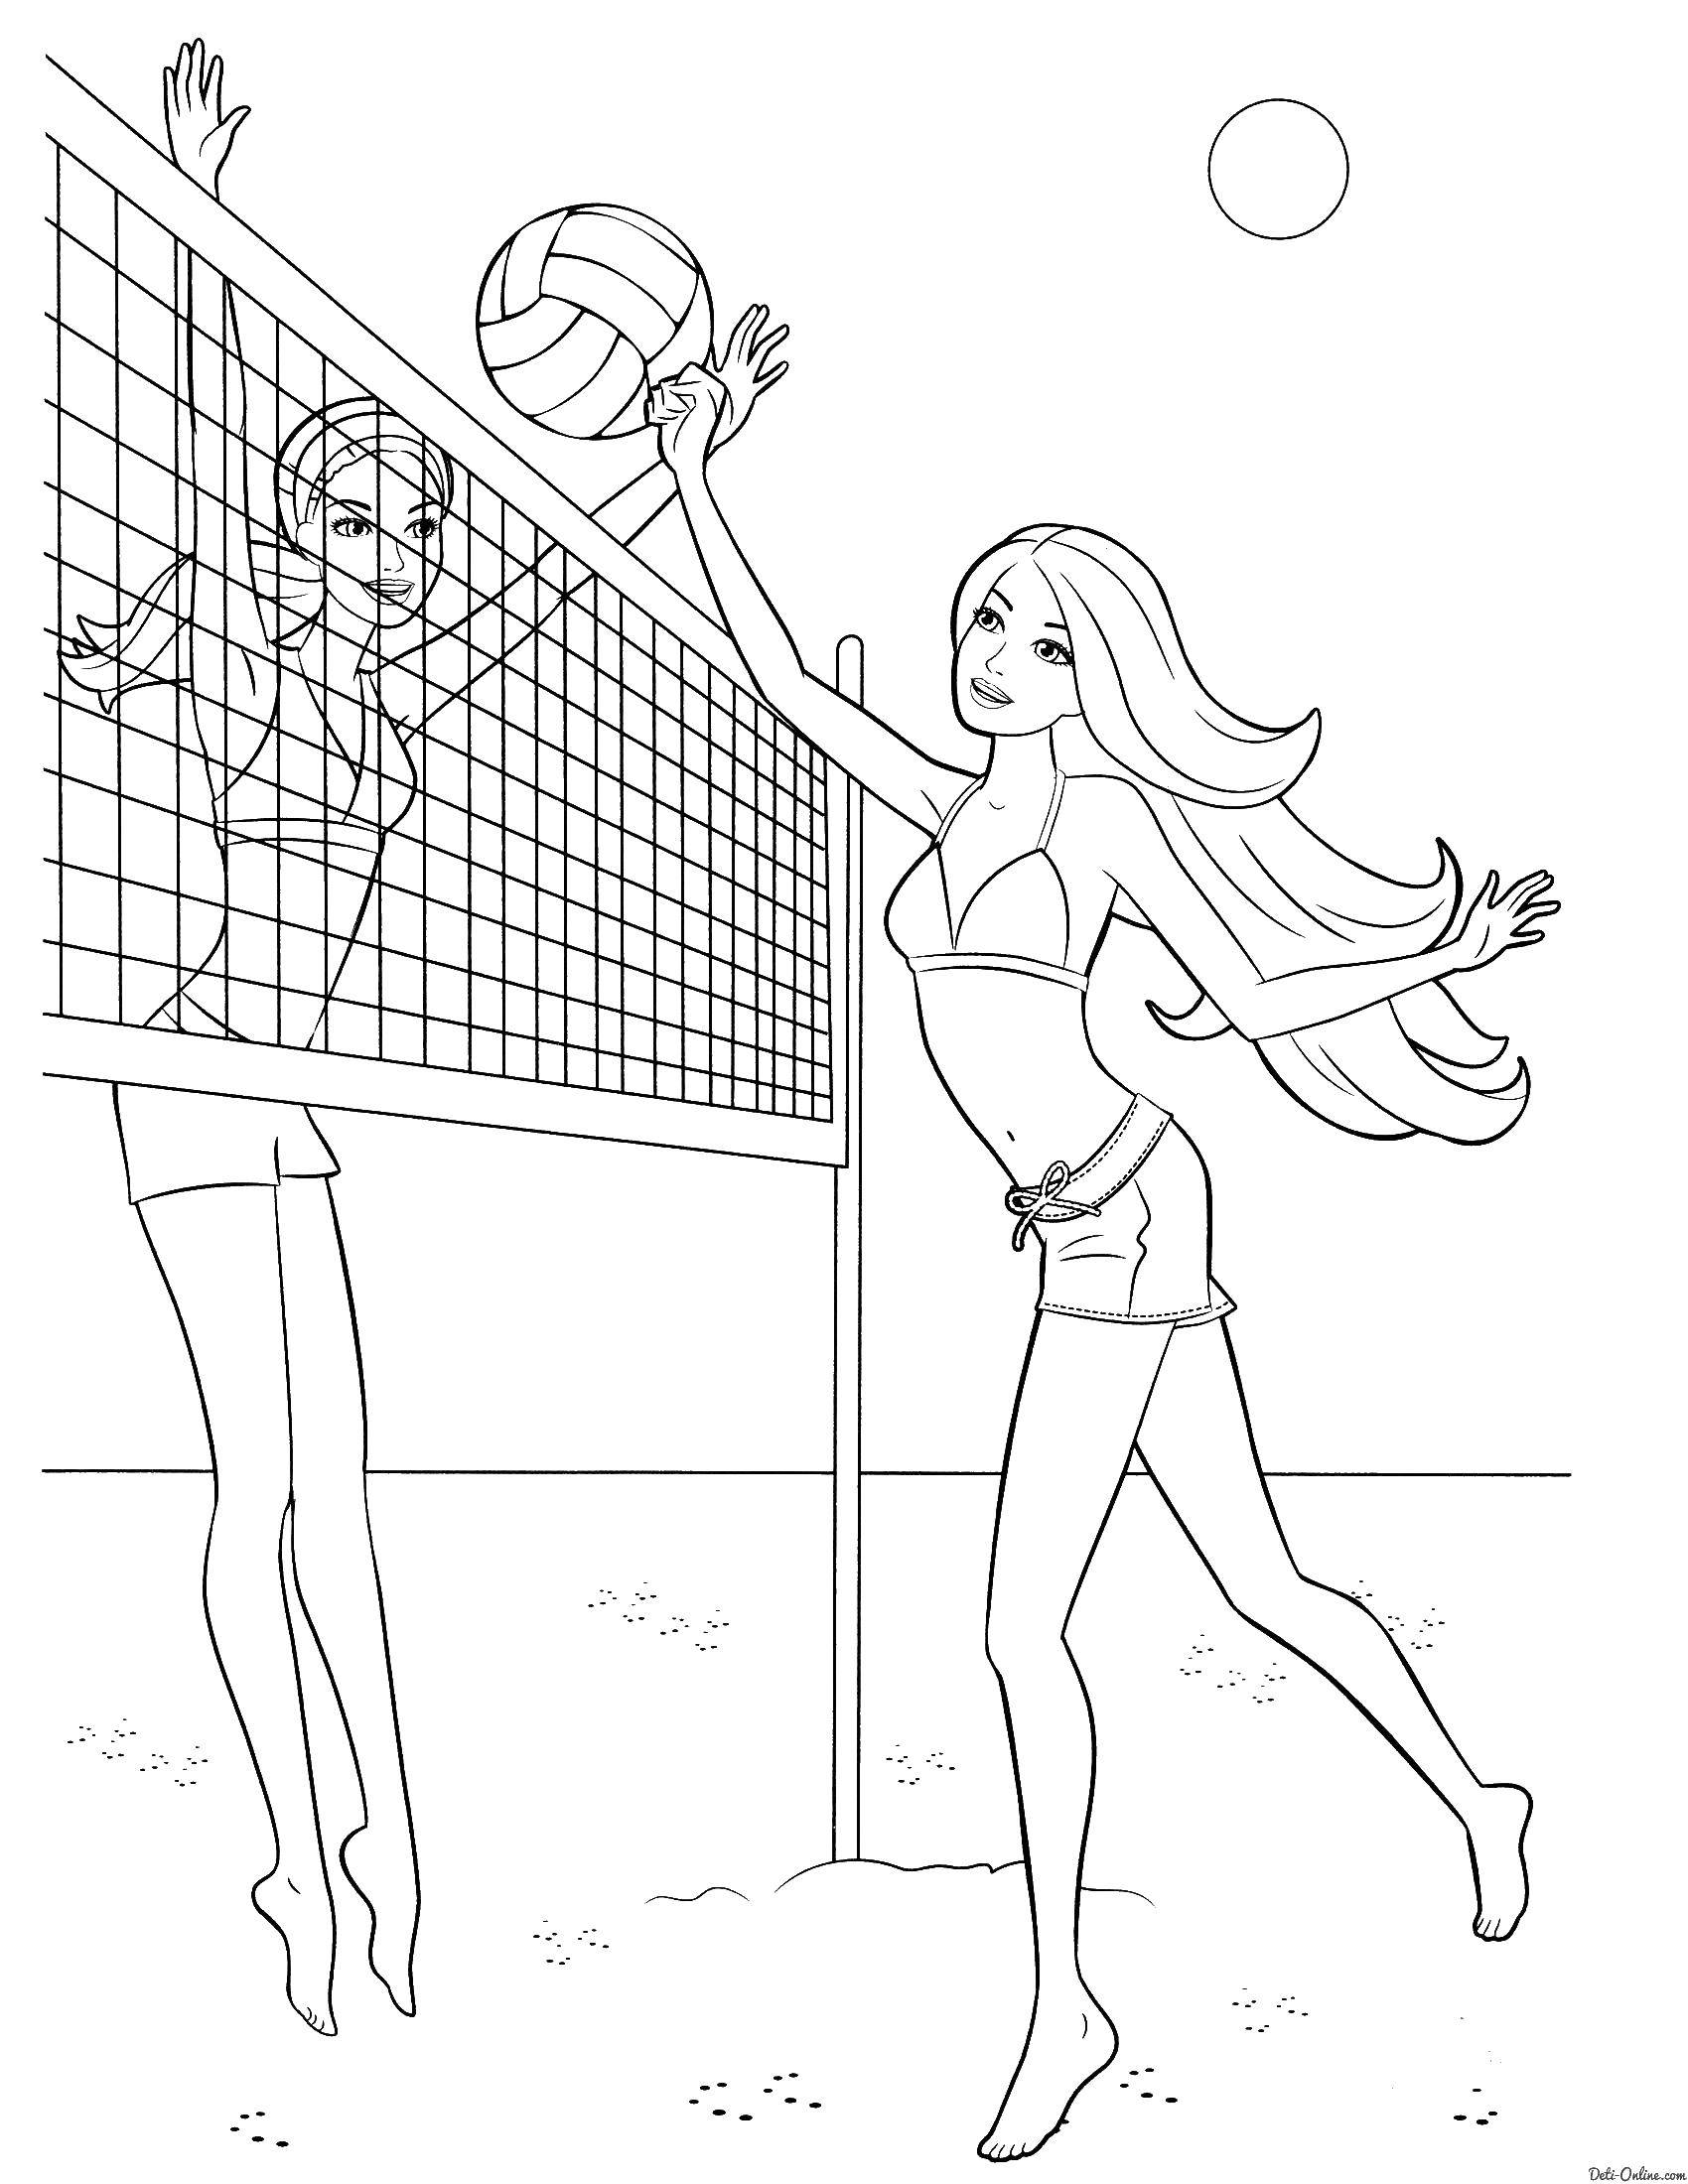 Coloring Barbie playing volleyball. Category Barbie . Tags:  Barbie , girl. doll, beach, game.